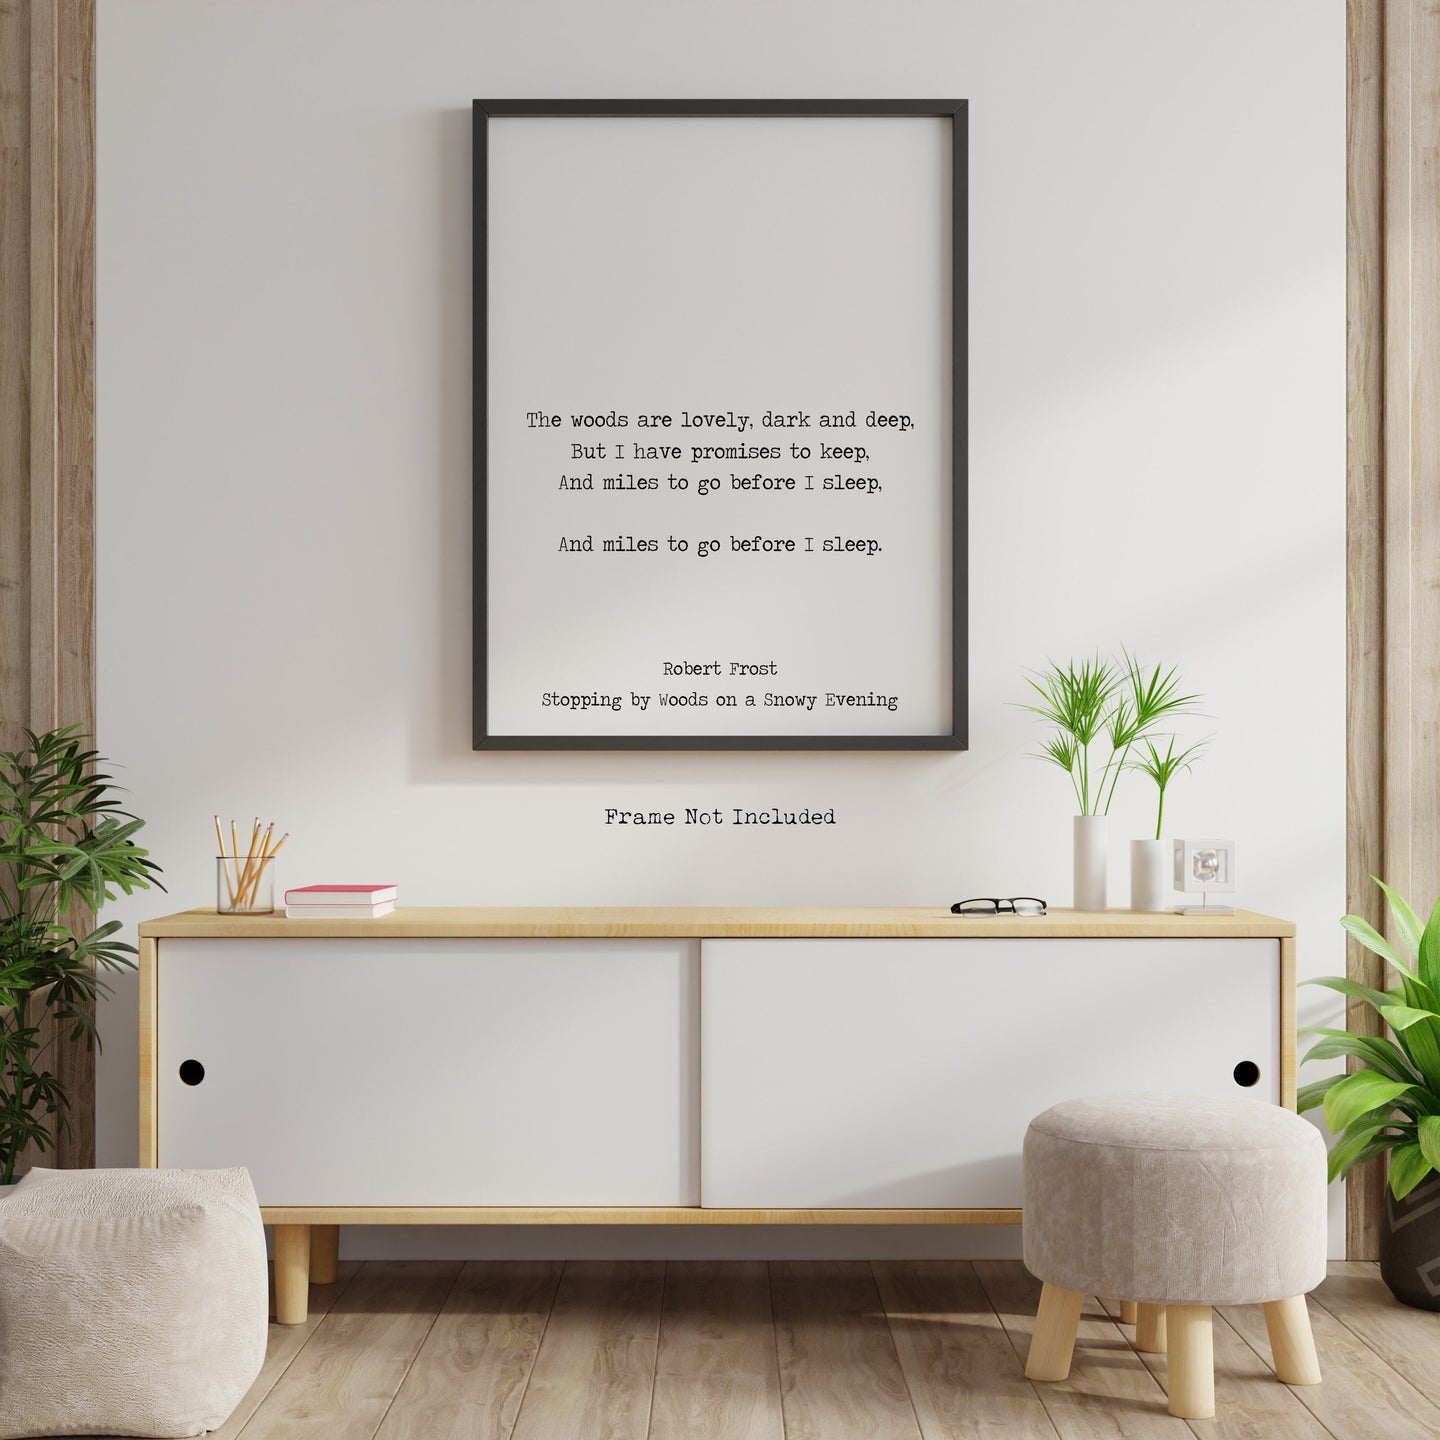 Robert Frost Print - The woods are lovely, dark and deep - Office decor print Robert frost quote Stopping by Woods on a Snowy Evening